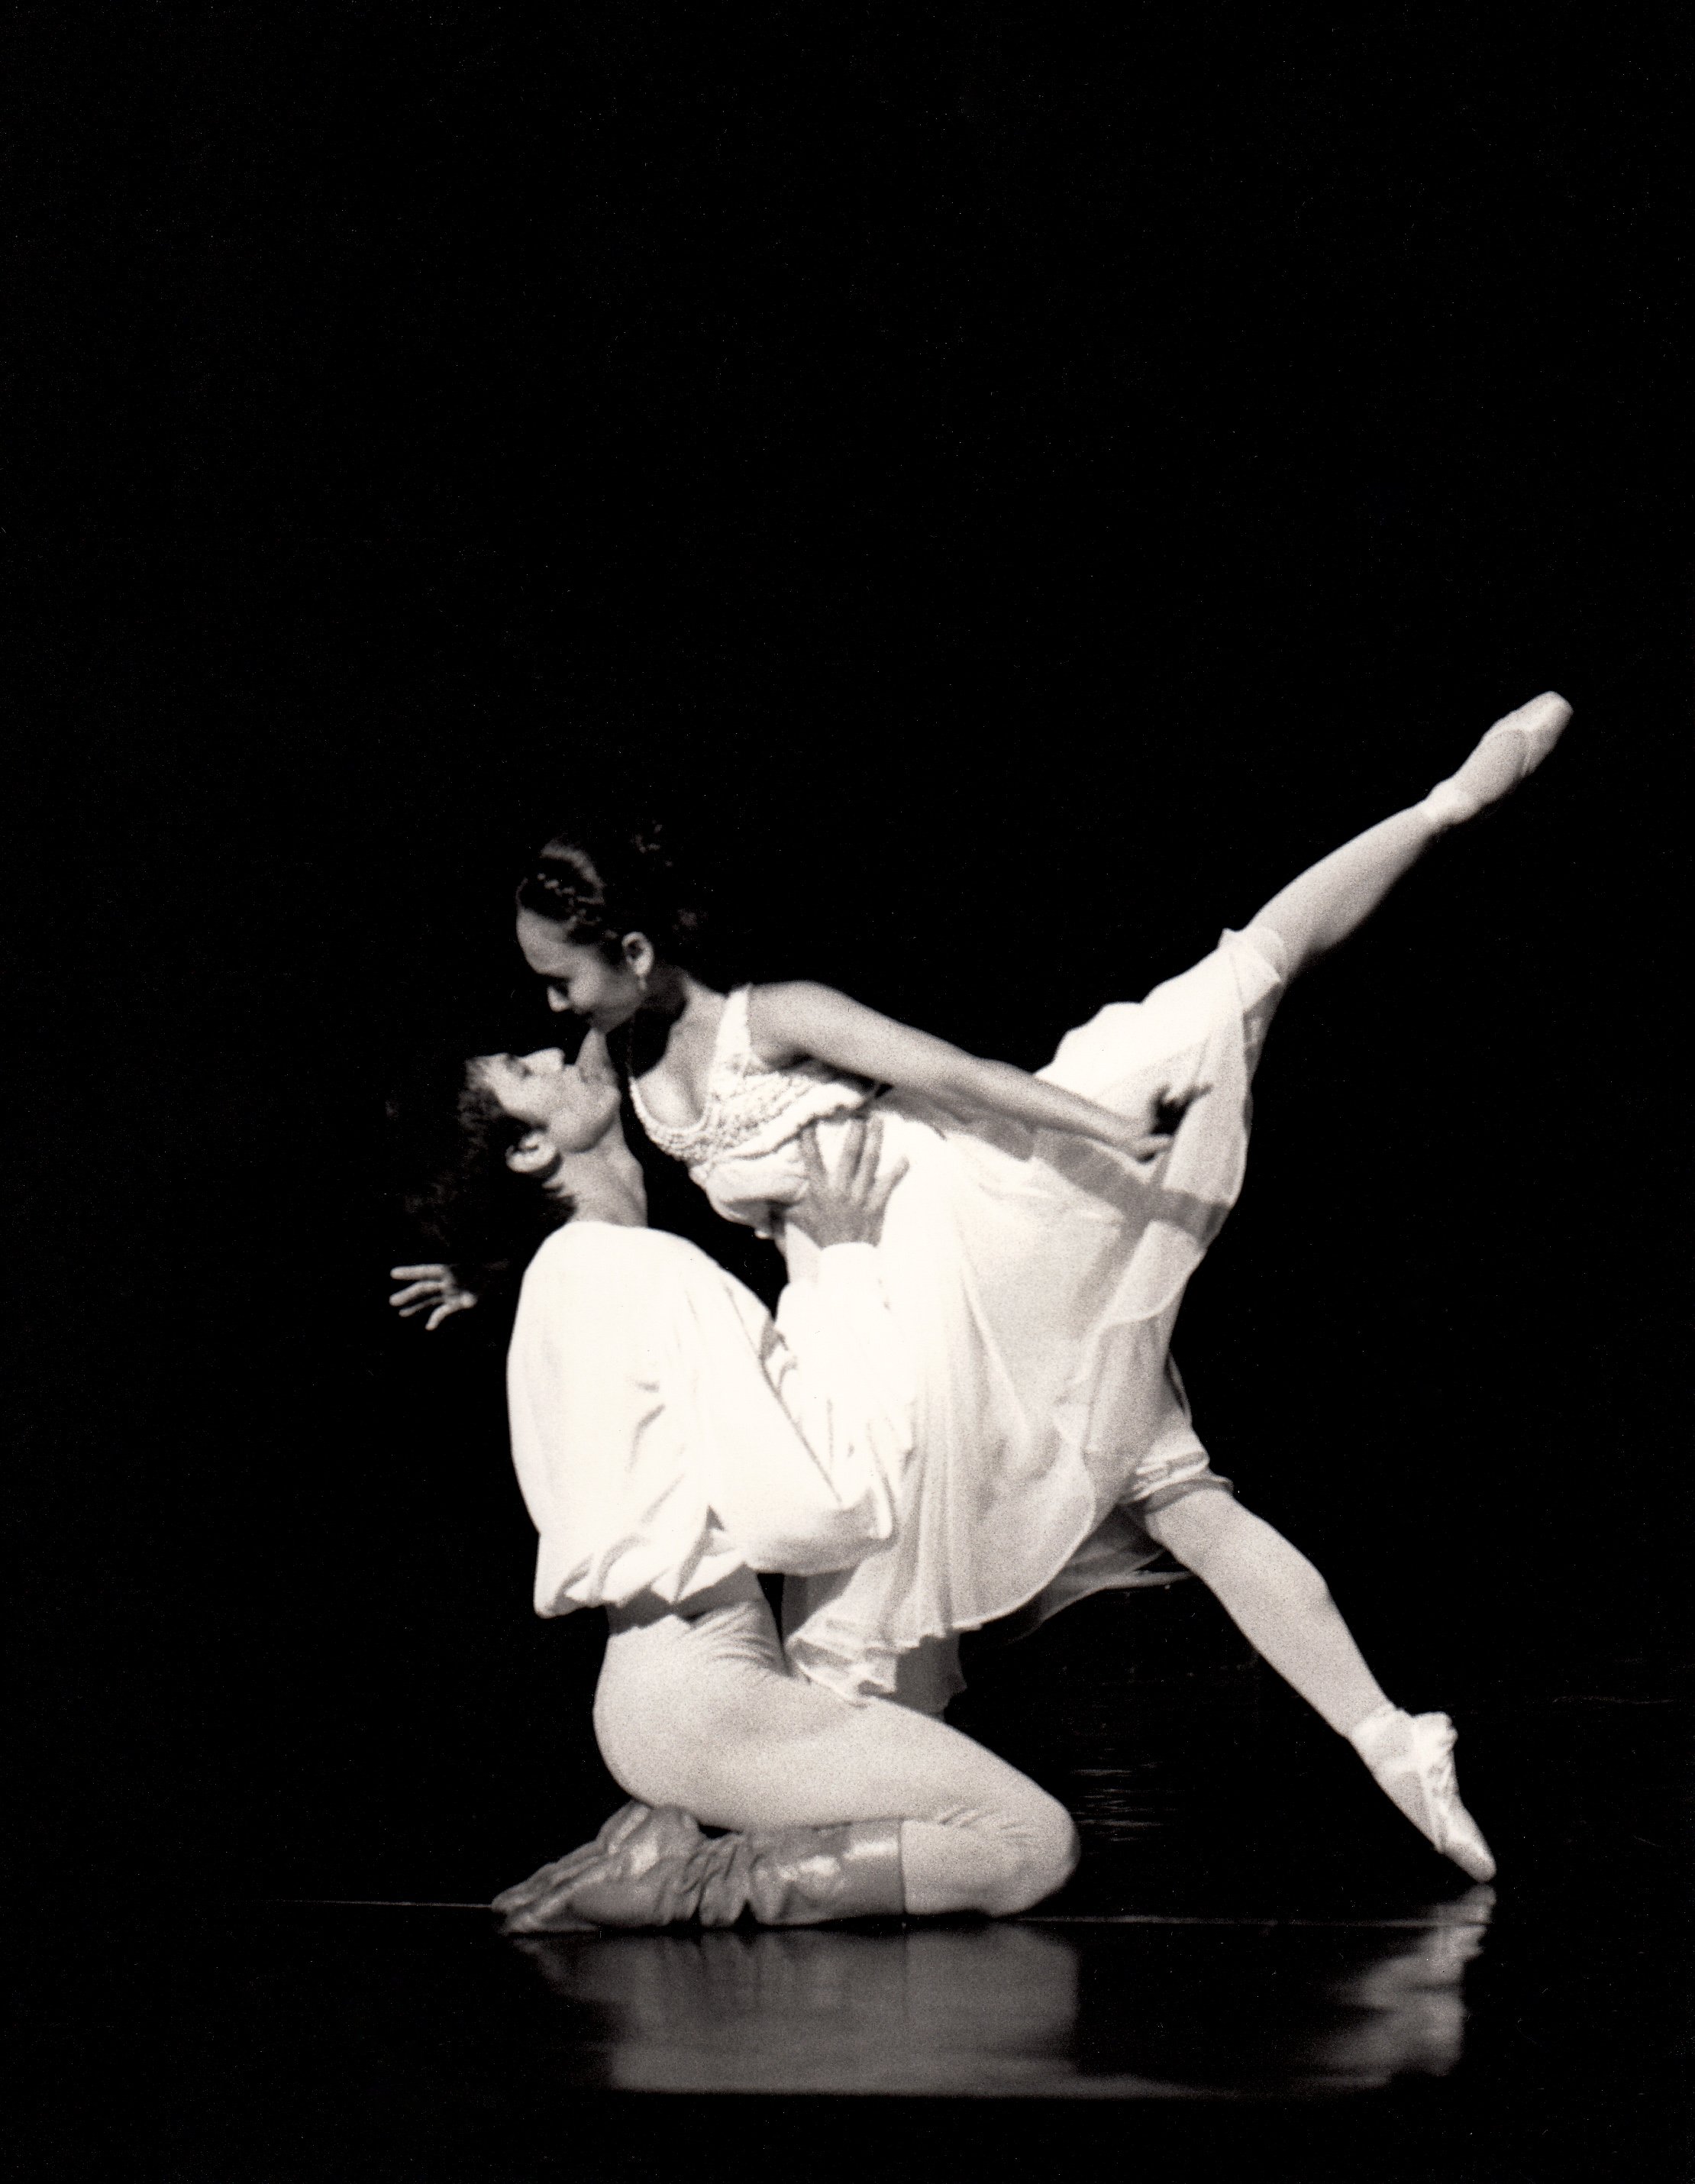    Intimate scene with Ou Lu,  Romeo and Juliet  tour with the Royal New Zealand Ballet, 1988. “I was so young and inexperienced that I specifically remember a moment in our rehearsal when choreographer Malcholm Burns had to explain how I need to tur